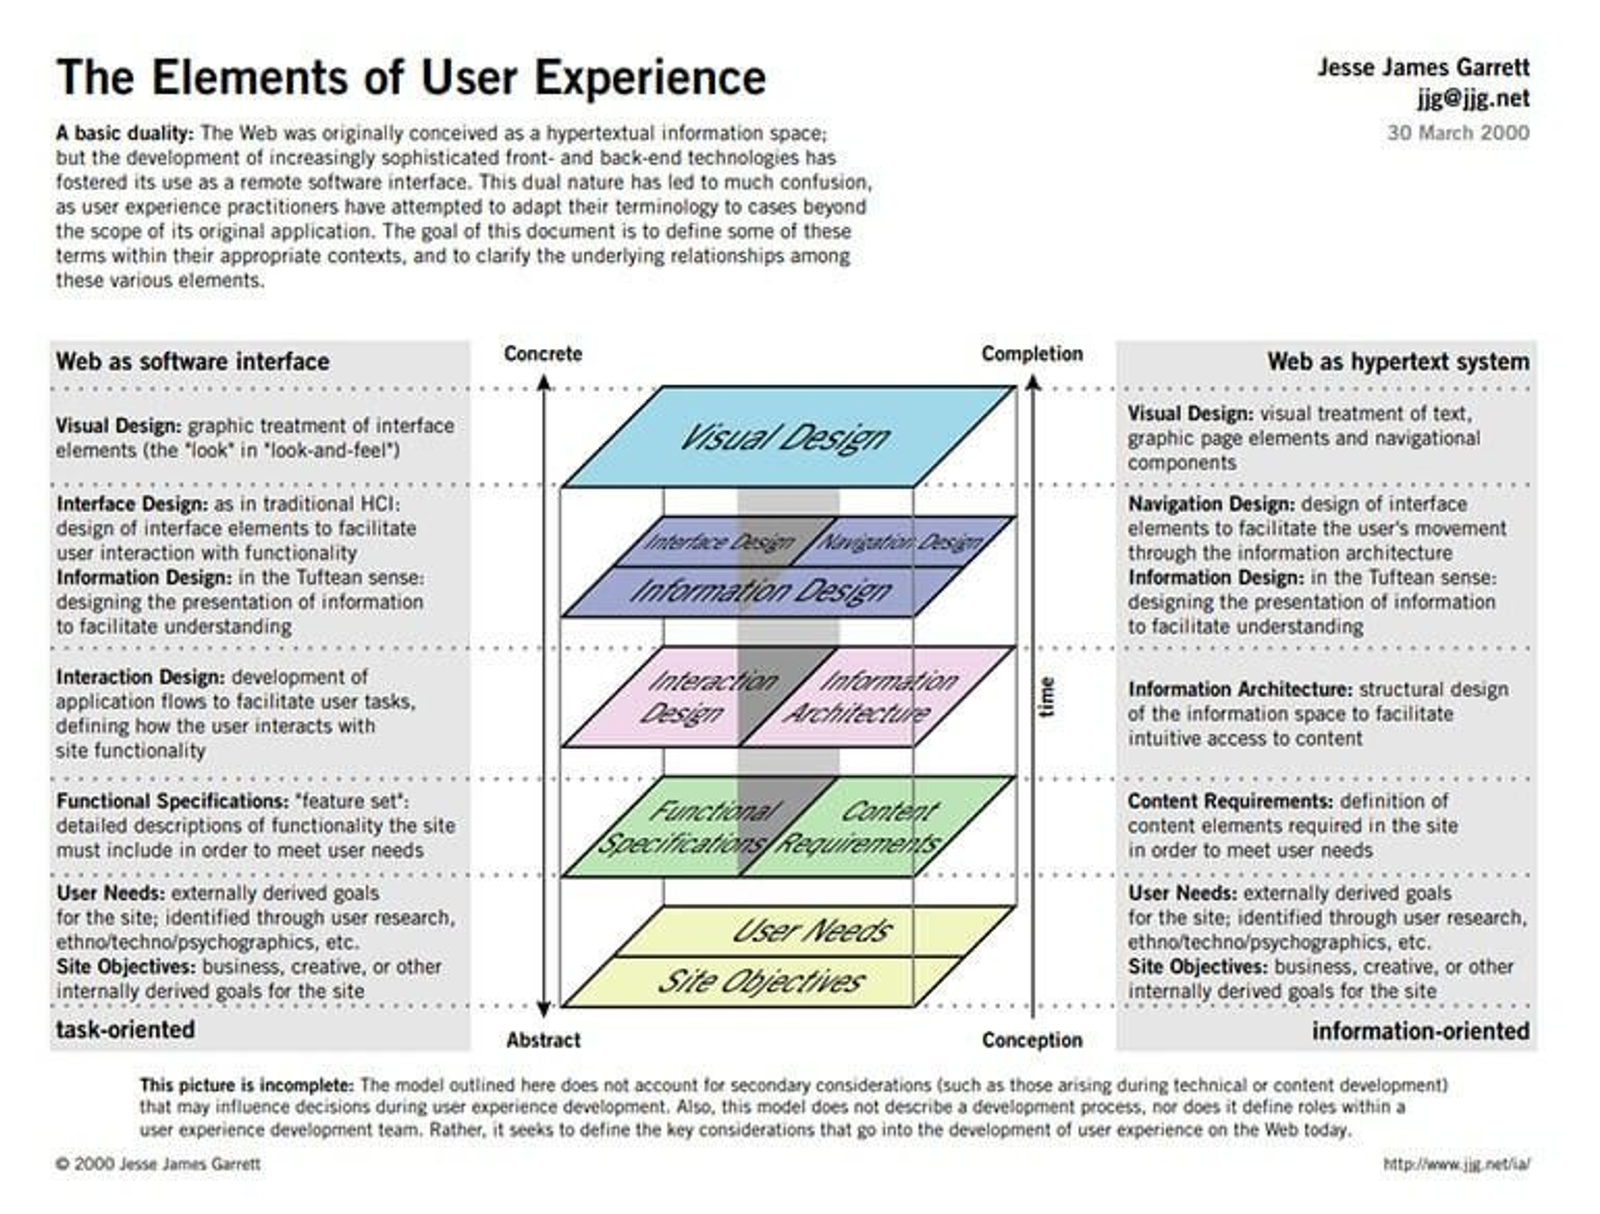 The elements of User Experience